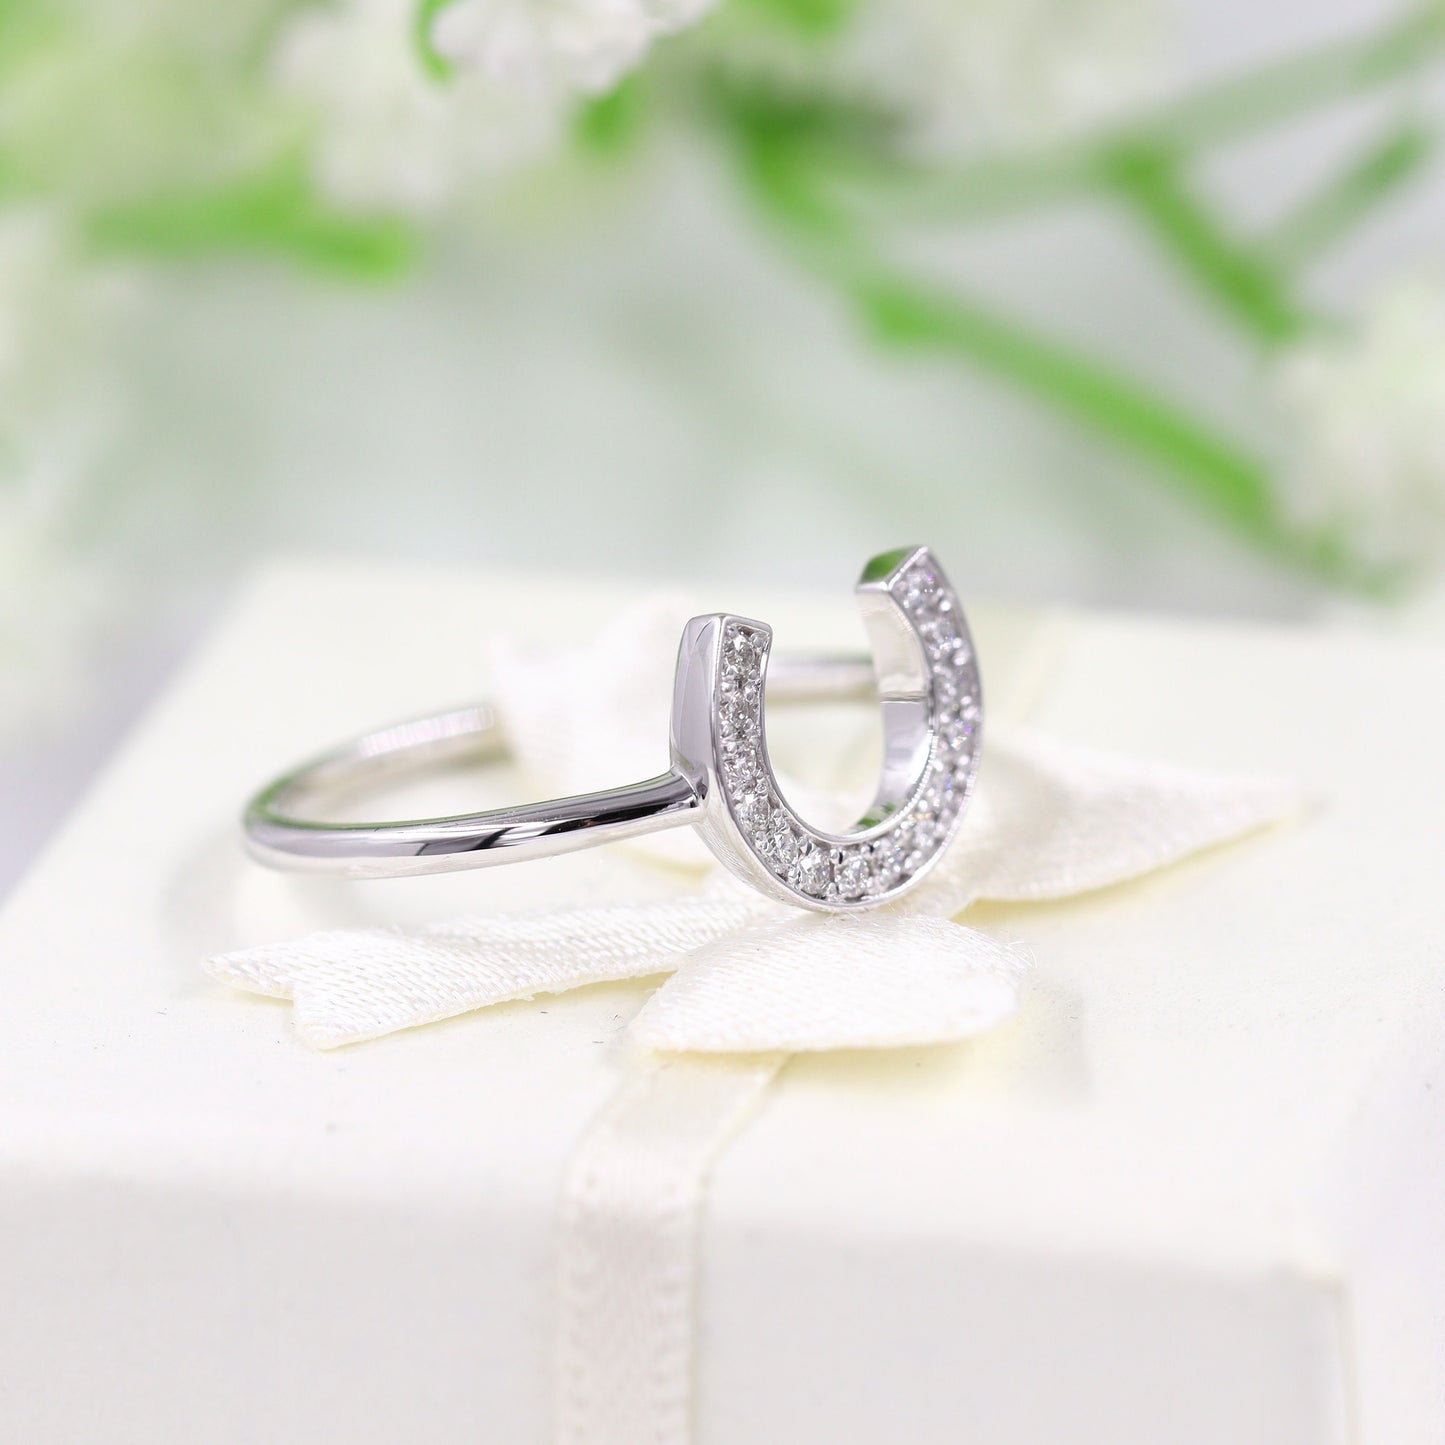 Horse shoe Diamond Wedding Band/Unique Band/14K Solid Gold Natural Diamond Horse shoe Ring/Gift for Her/Anniversary Gift